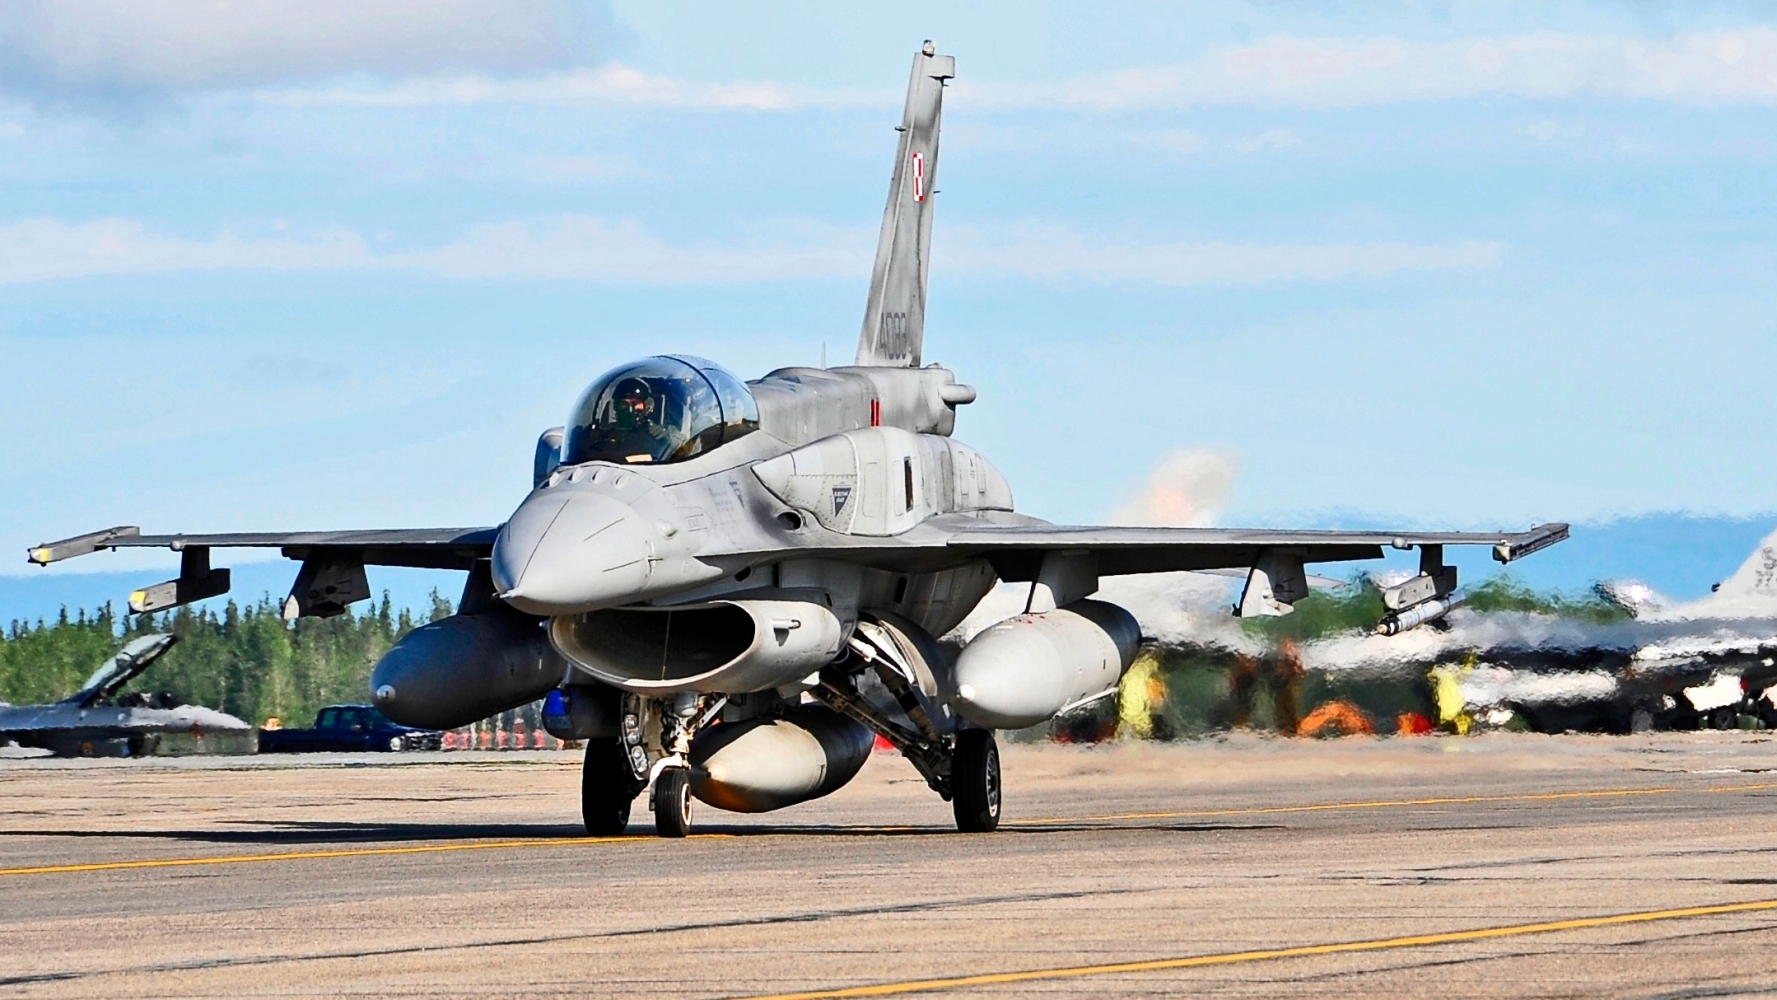 John Kirby: Ukraine will probably receive the F-16 by the end of the year